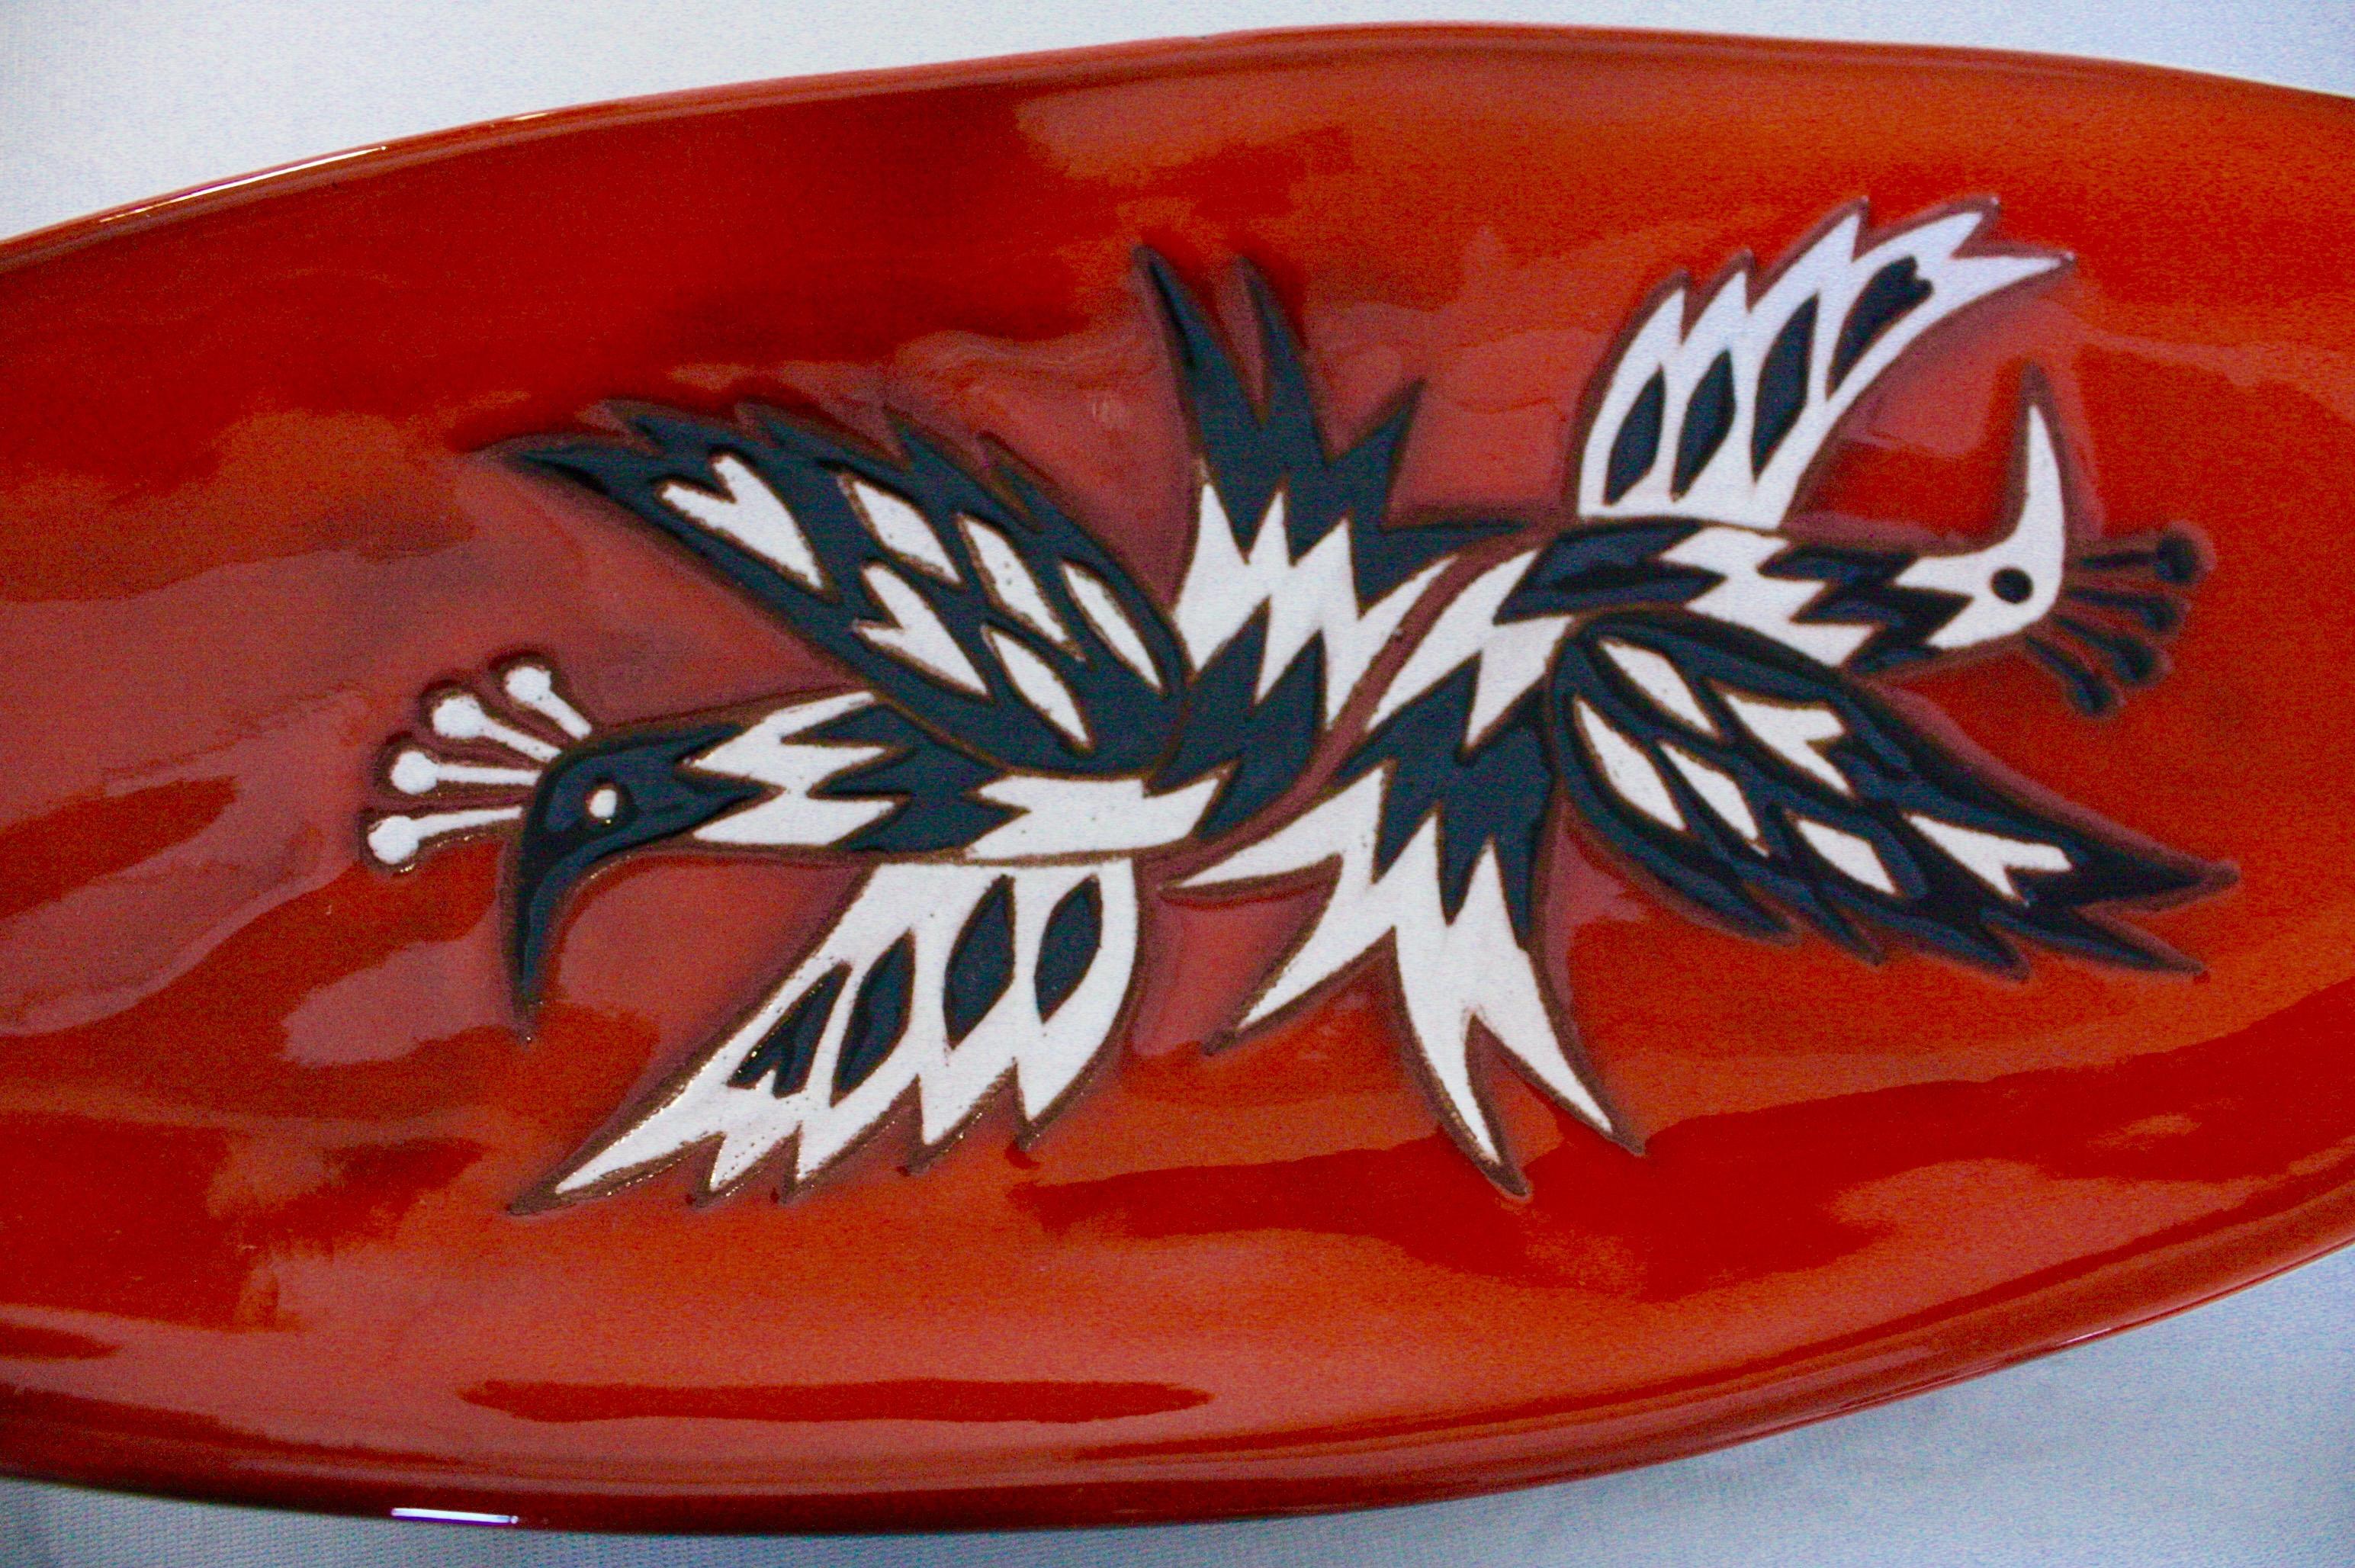 Jean Picart Le Doux (1902-1982)
Large 'Birds' vide-poches
of elongated oval shape,
glazed and enameled earthenware

Signed 